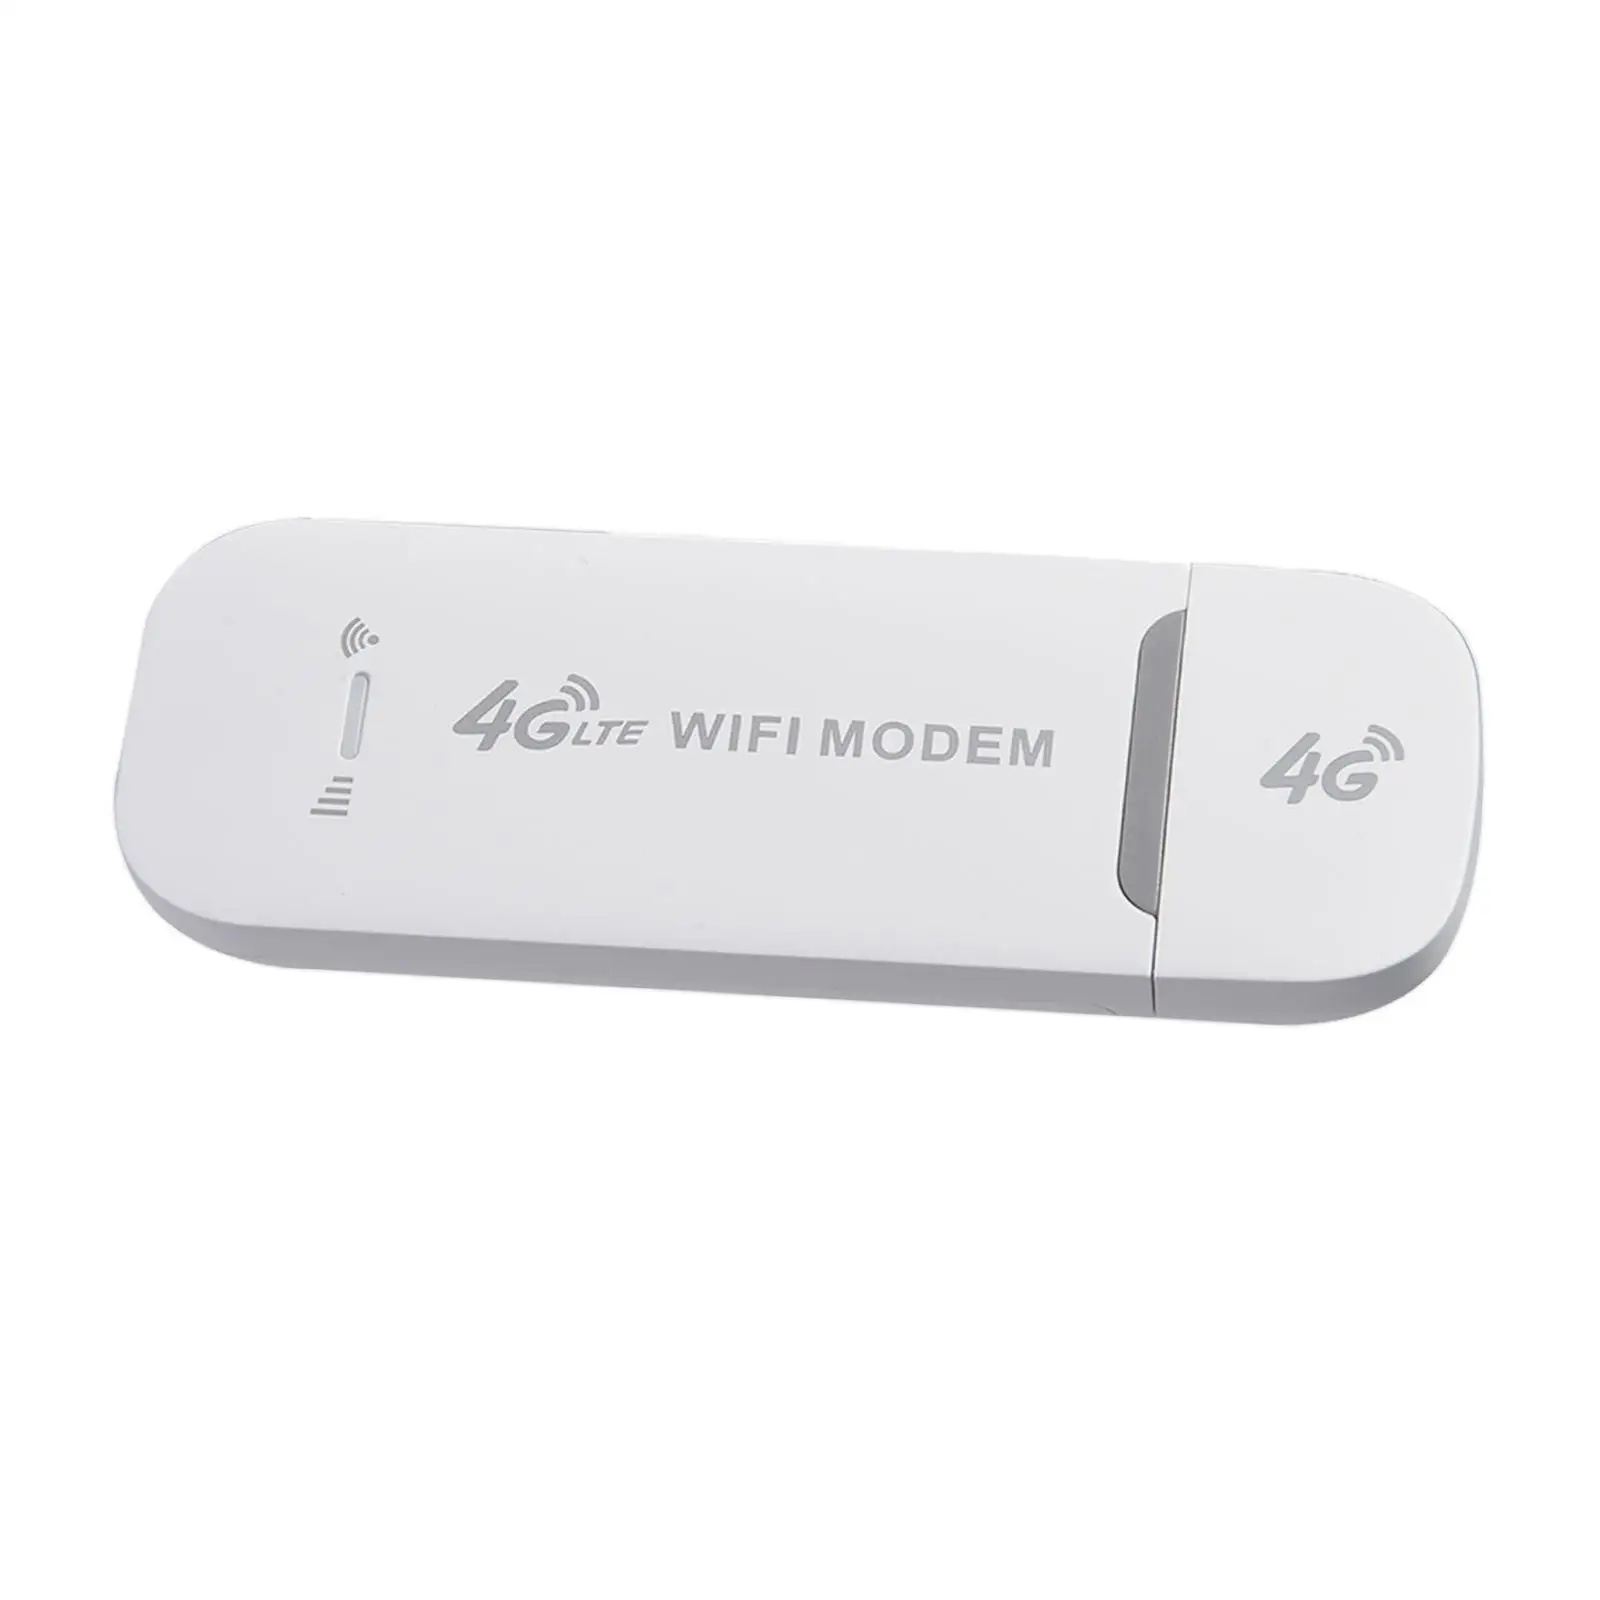 4G USB WiFi Router with Sim Card Slot Mobile Broadband unlock Stick Mobile Hotspots Pocket 4G WiFi Router Adapter for Laptop